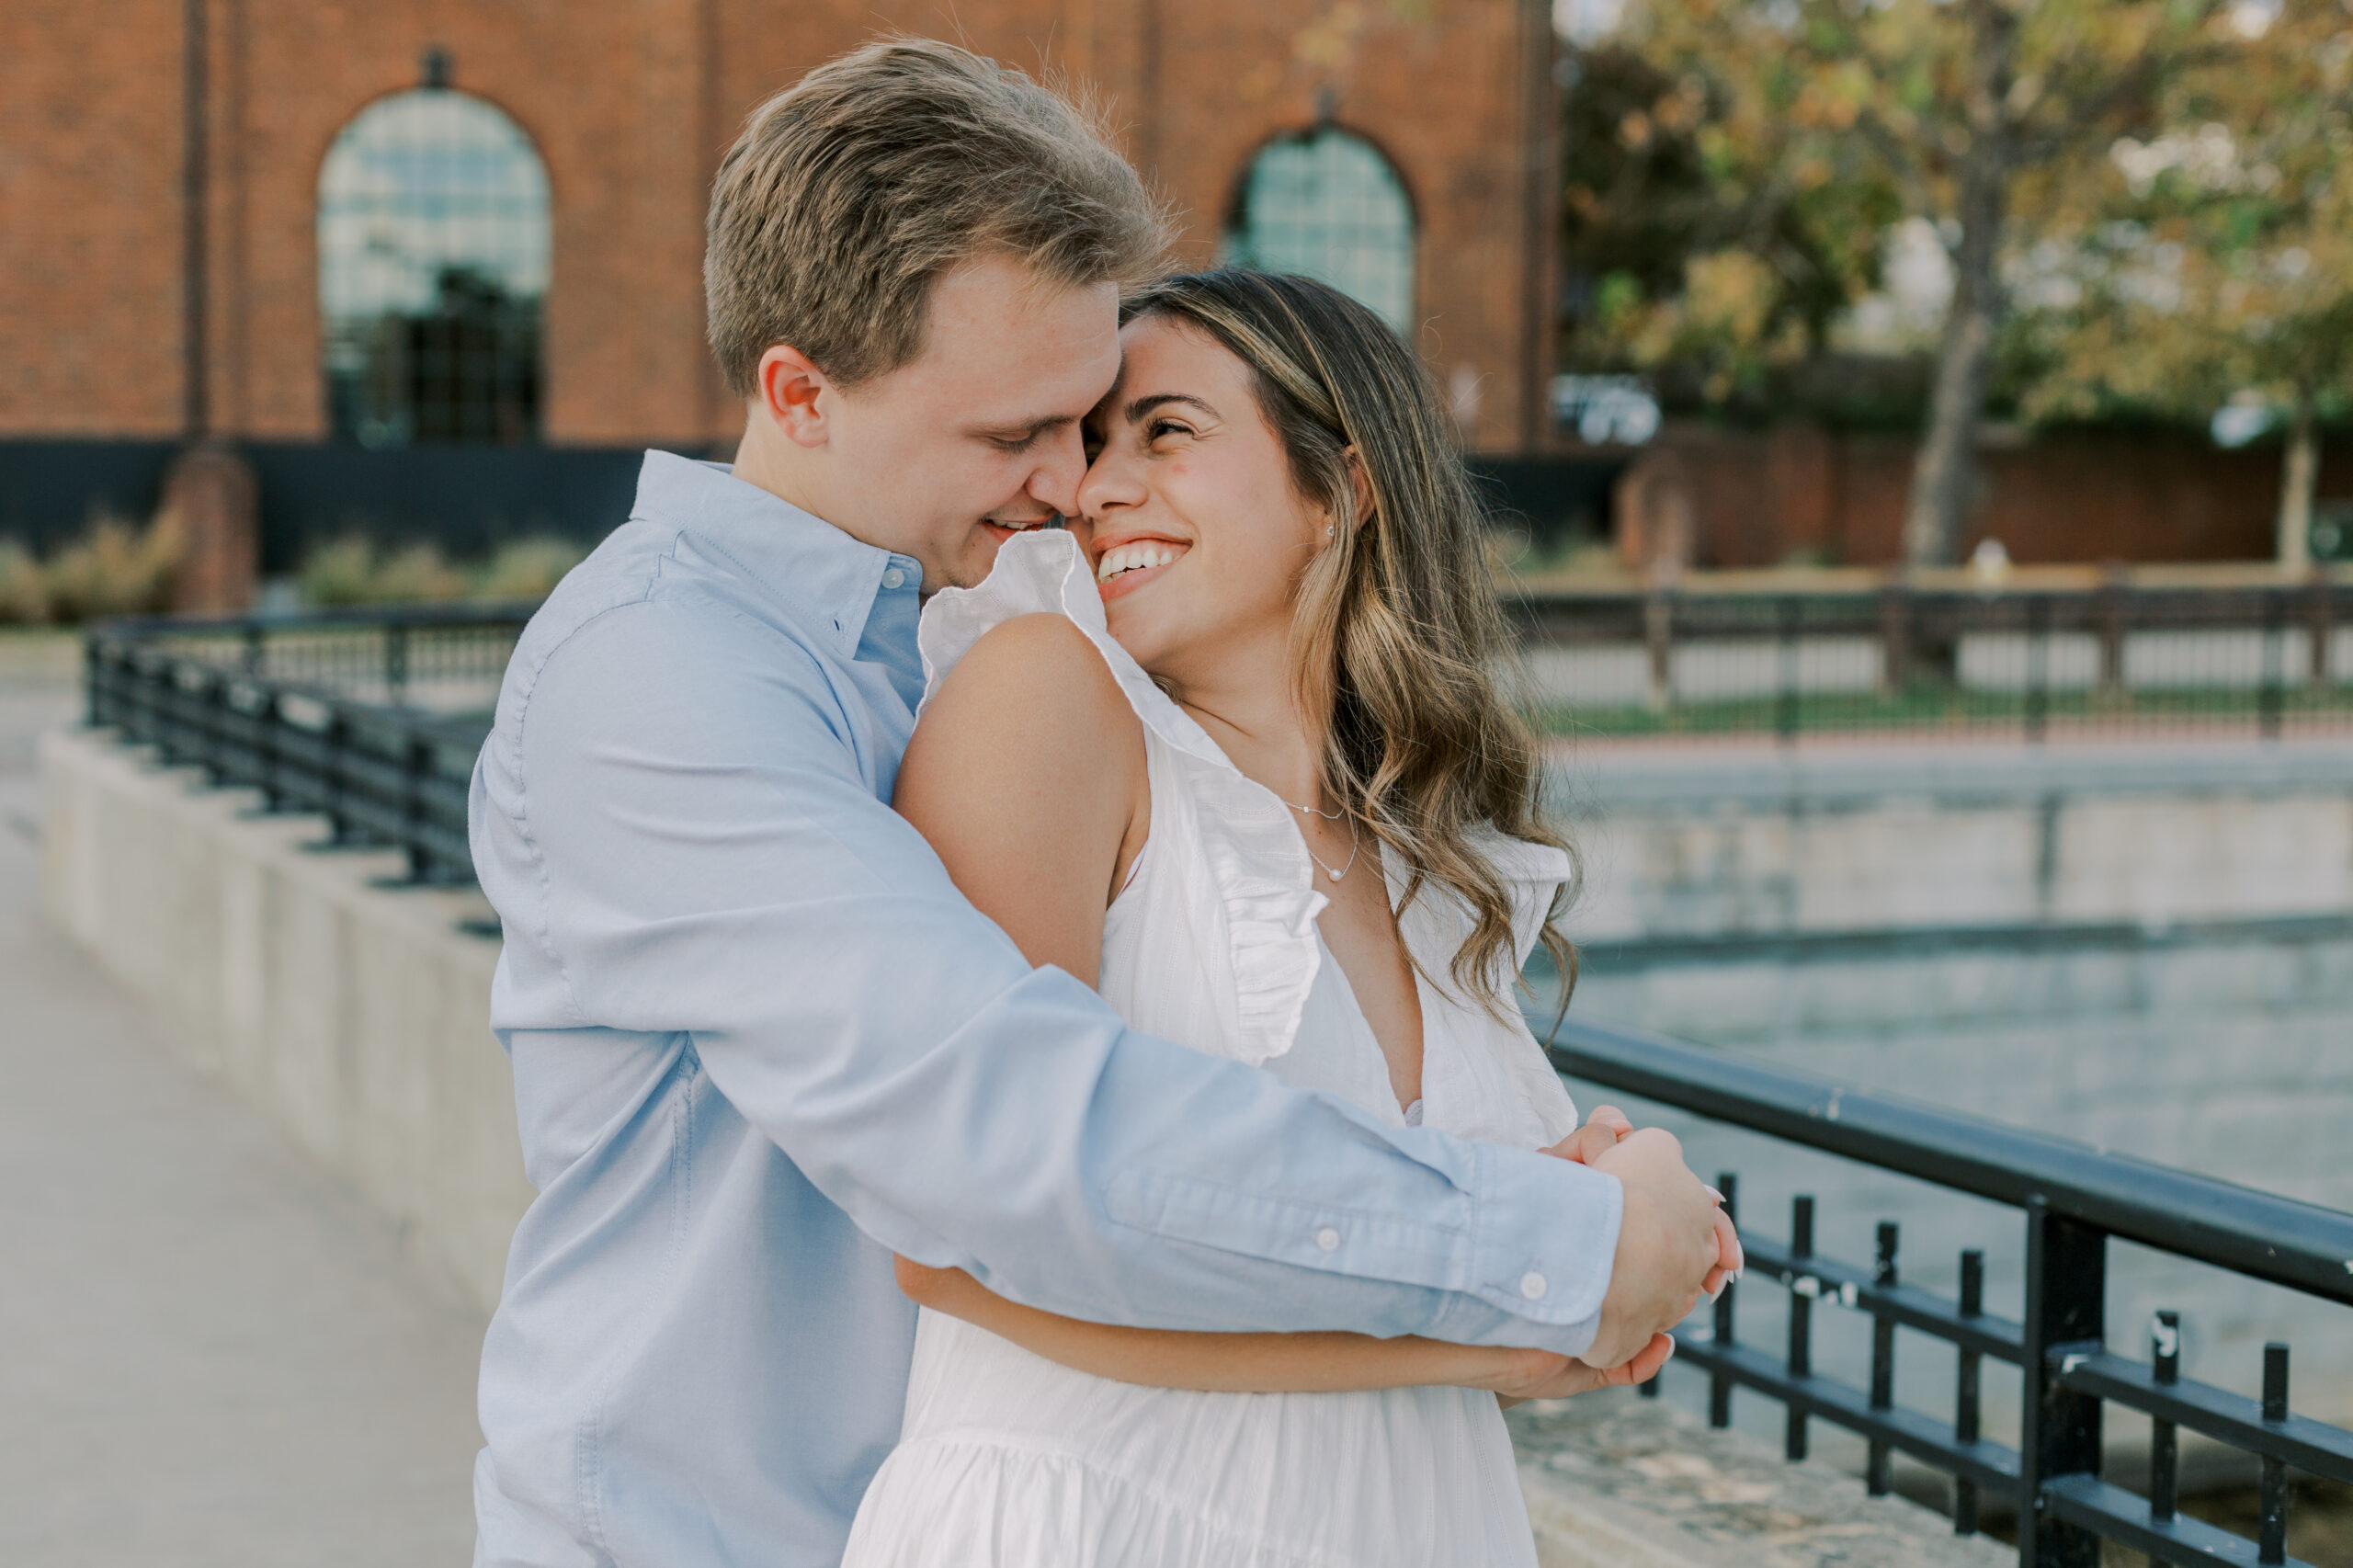 Man hugging woman from behind, she looks back smiling at him, his arms wrapped around her, their hands holding on to one another at their tredegar ironworks fall engagement session